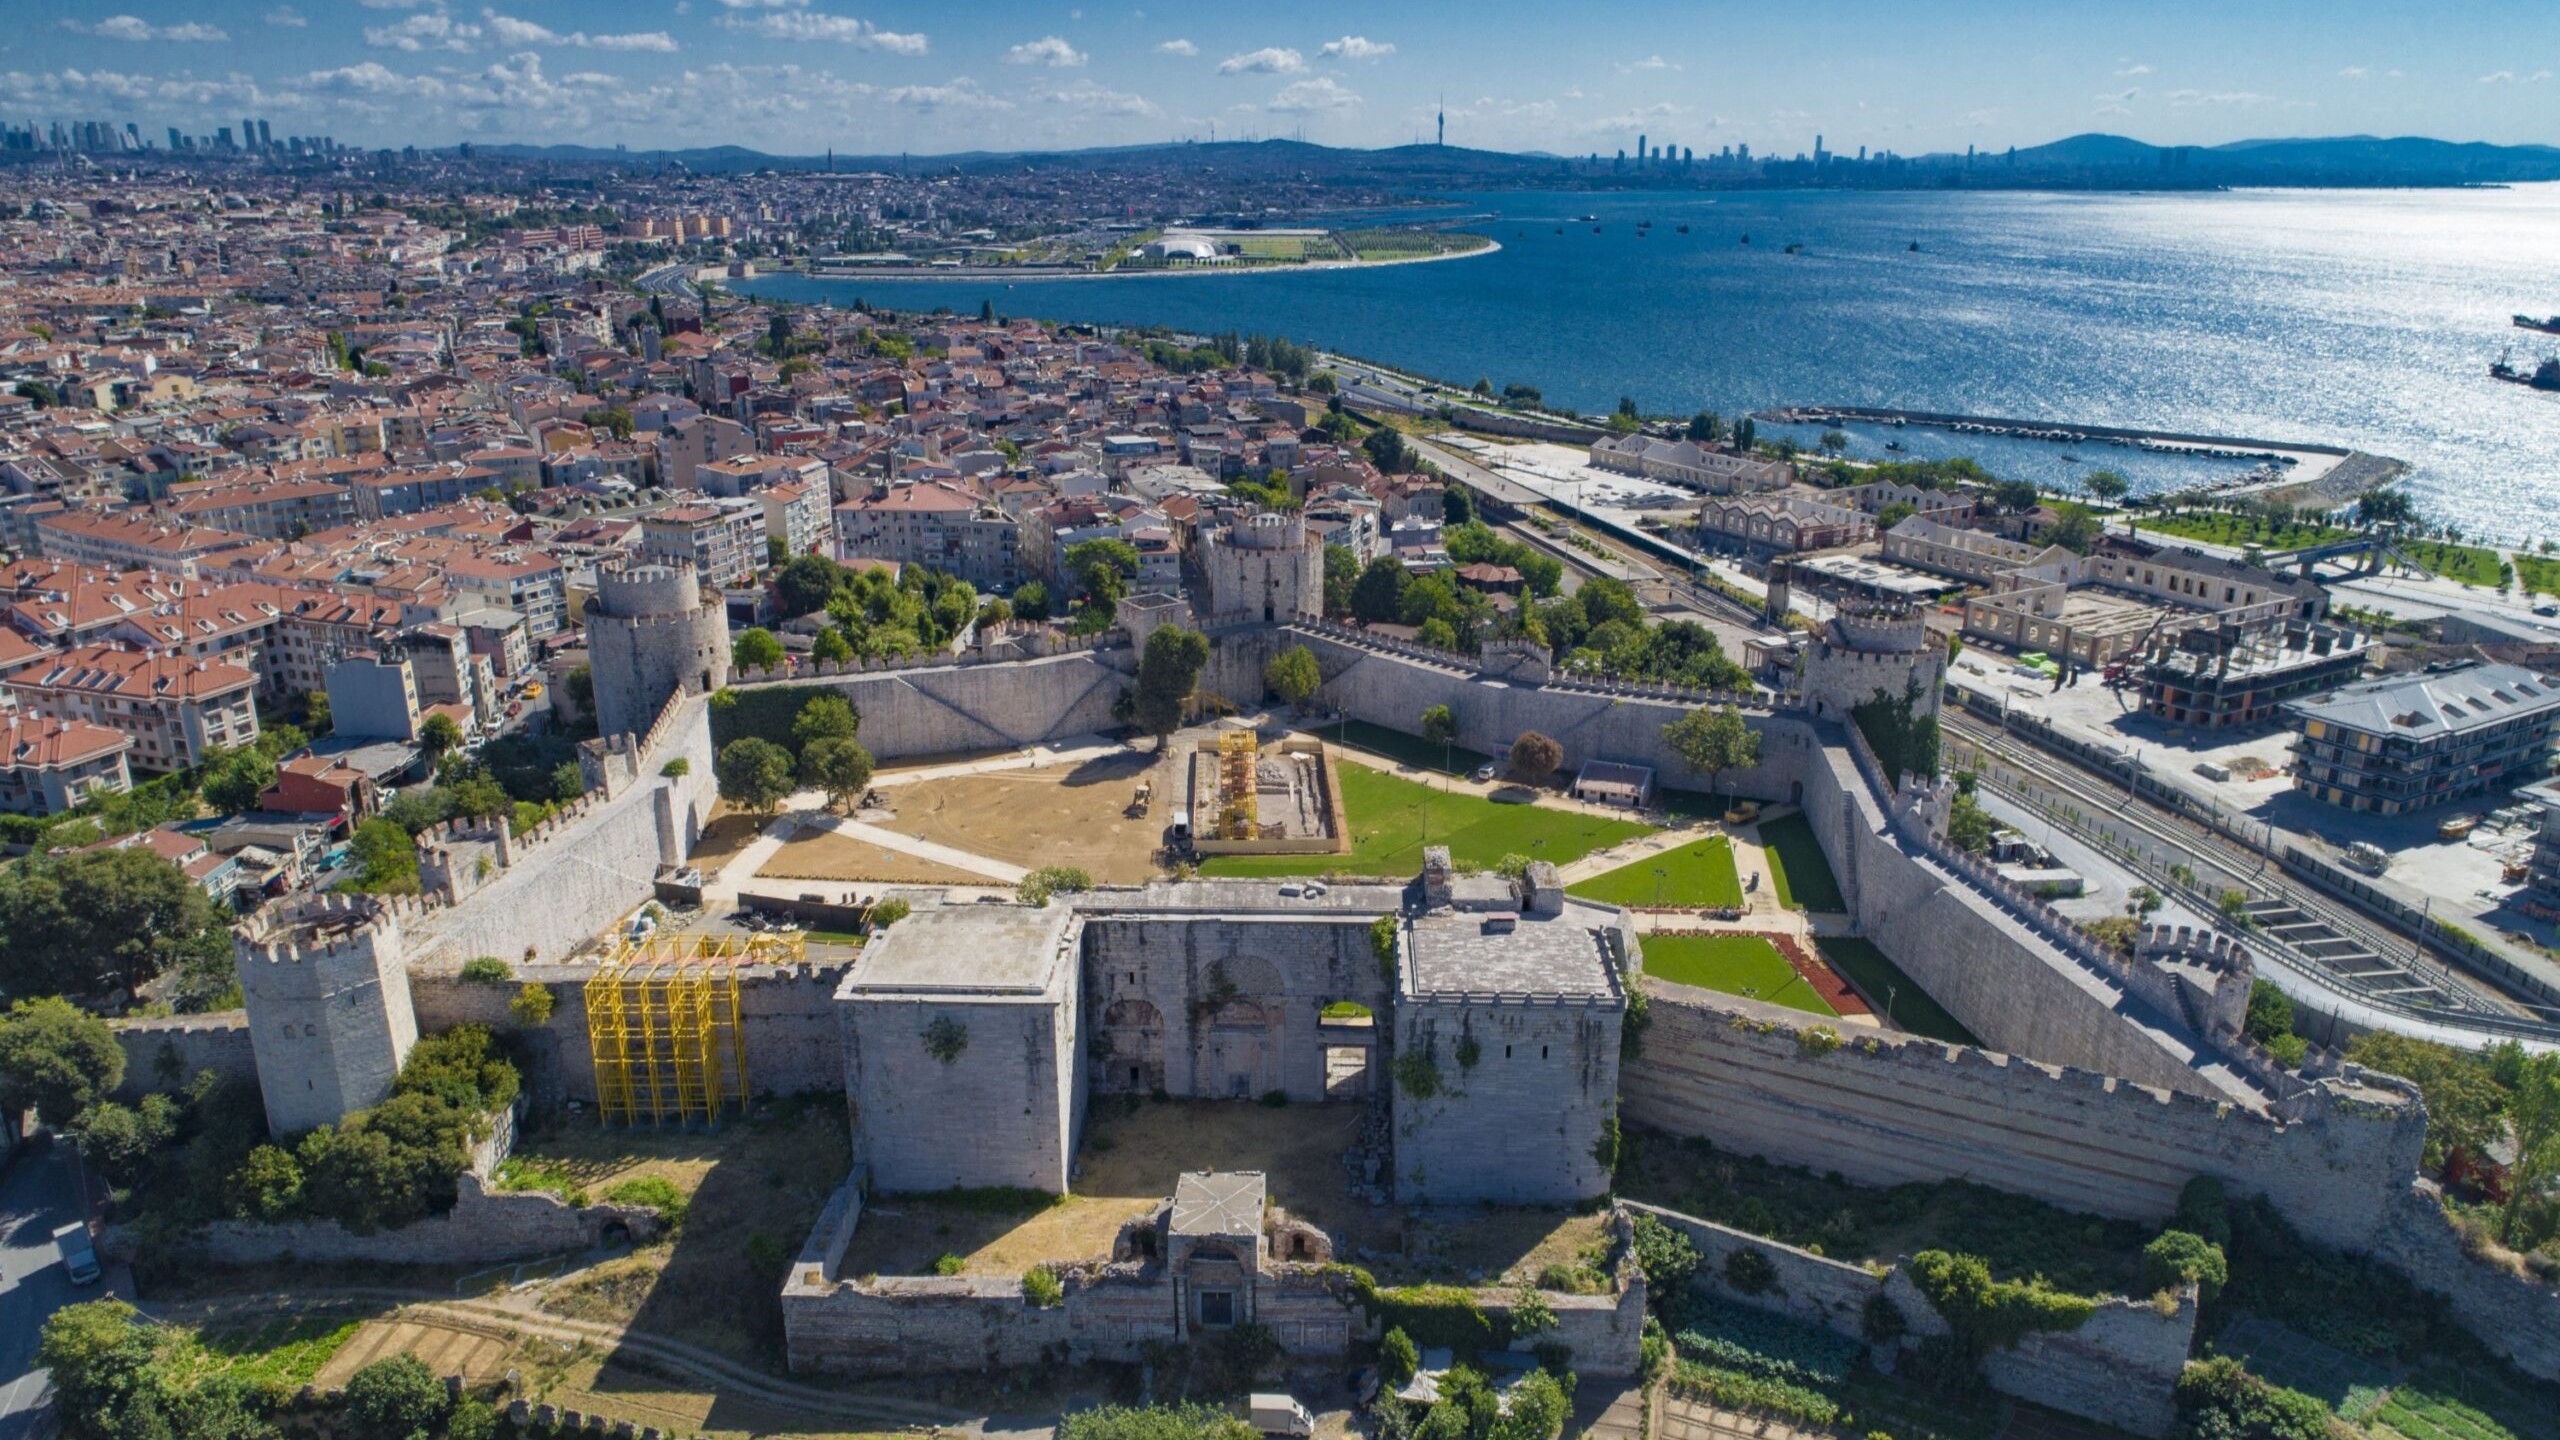 Yedikule Fortress: An Ancient Citadel in the Heart of Istanbul